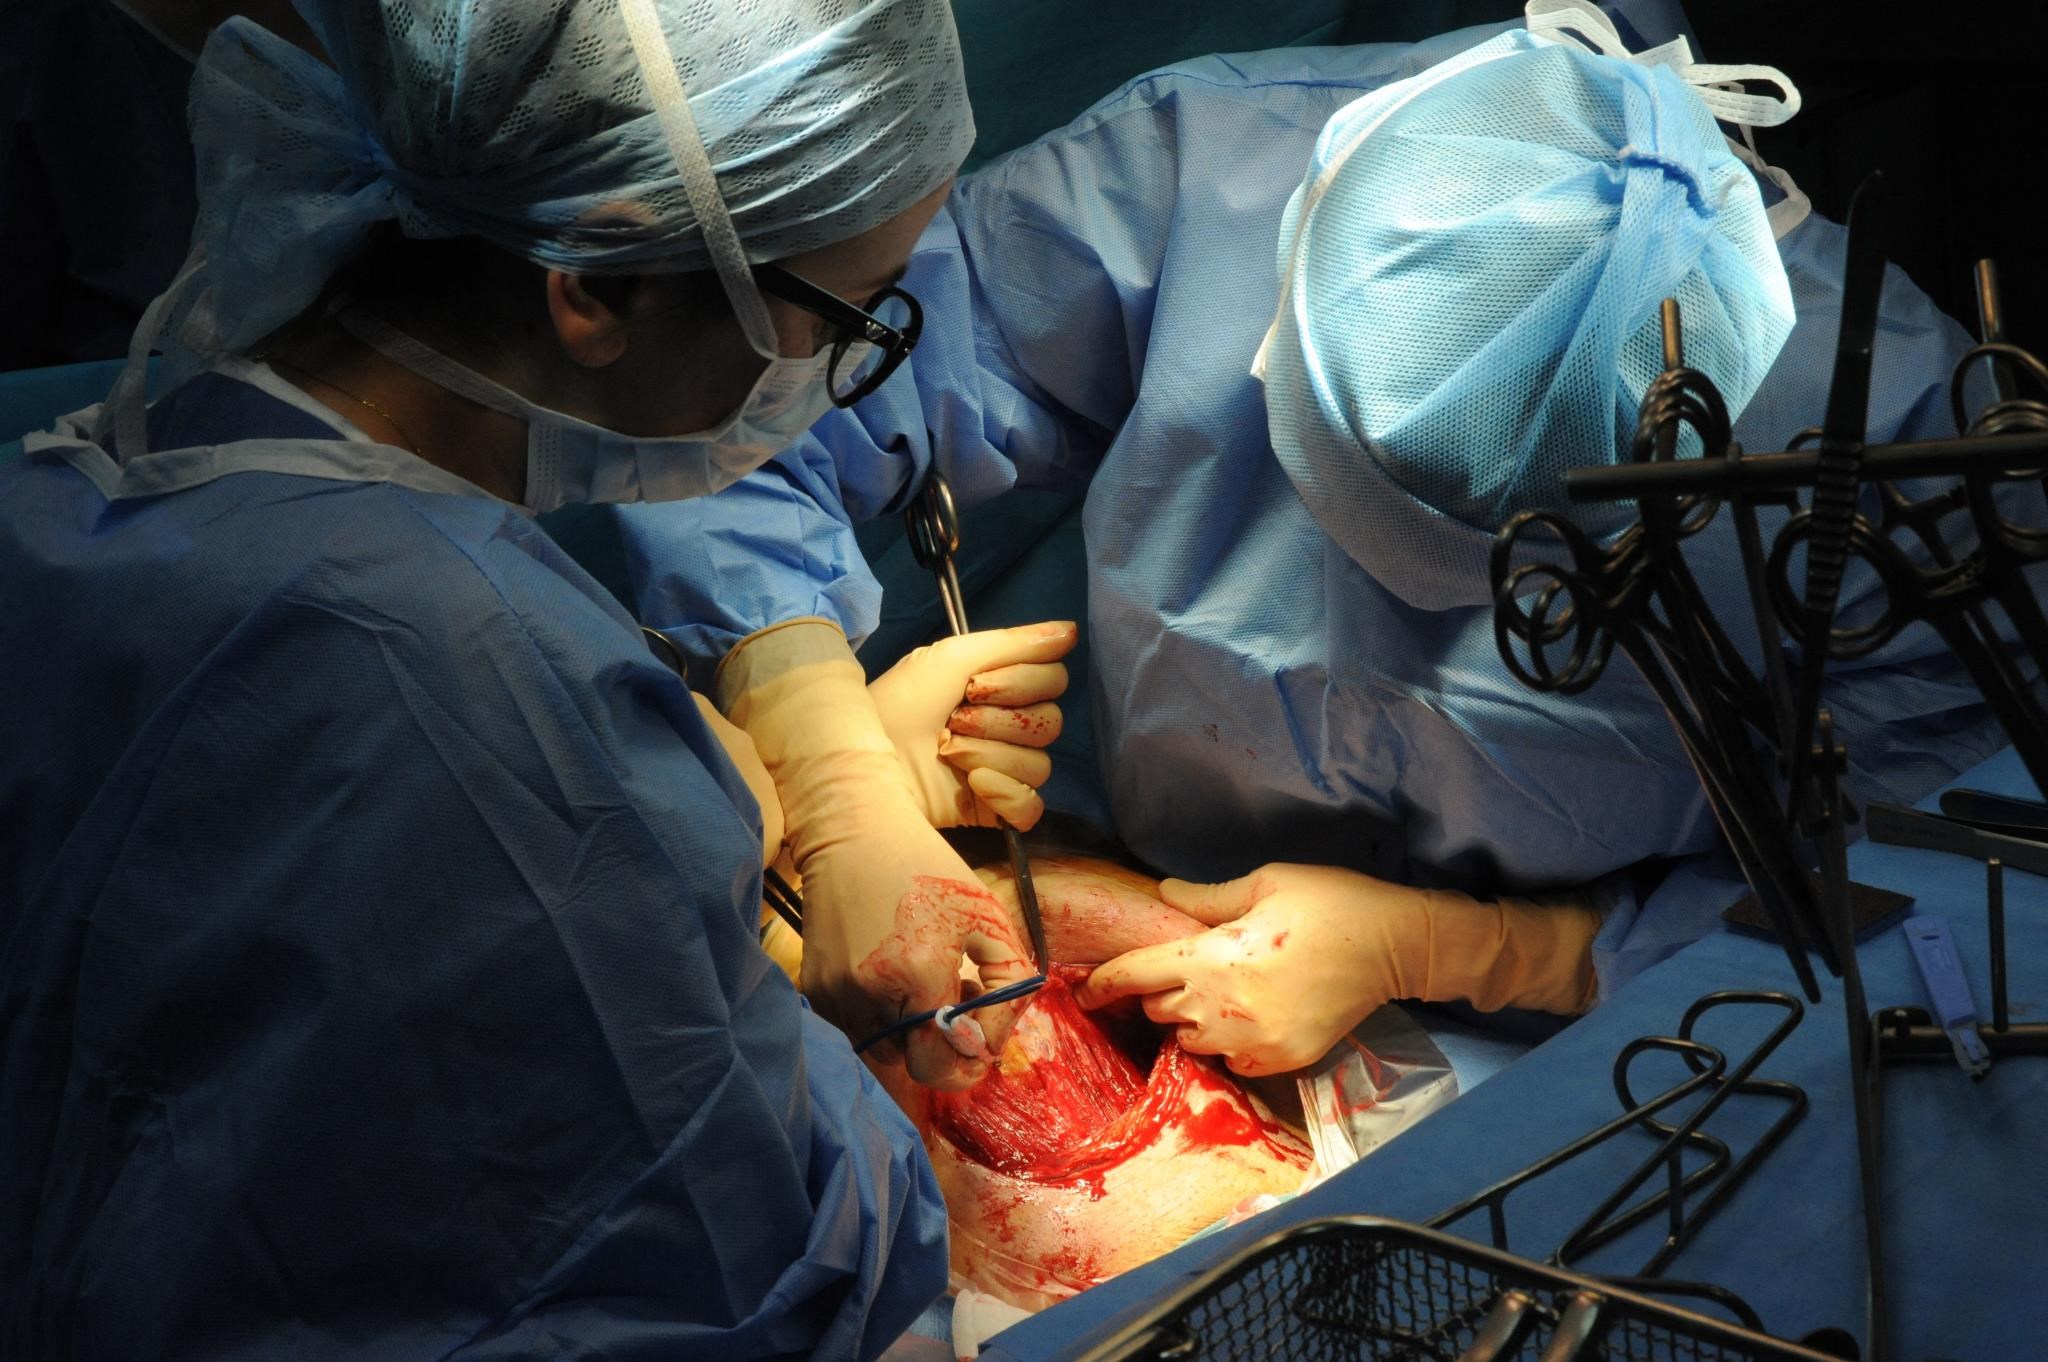 Life + Style: Doctors left a plate-sized device in a woman’s body after a caesarean section in New Zealand